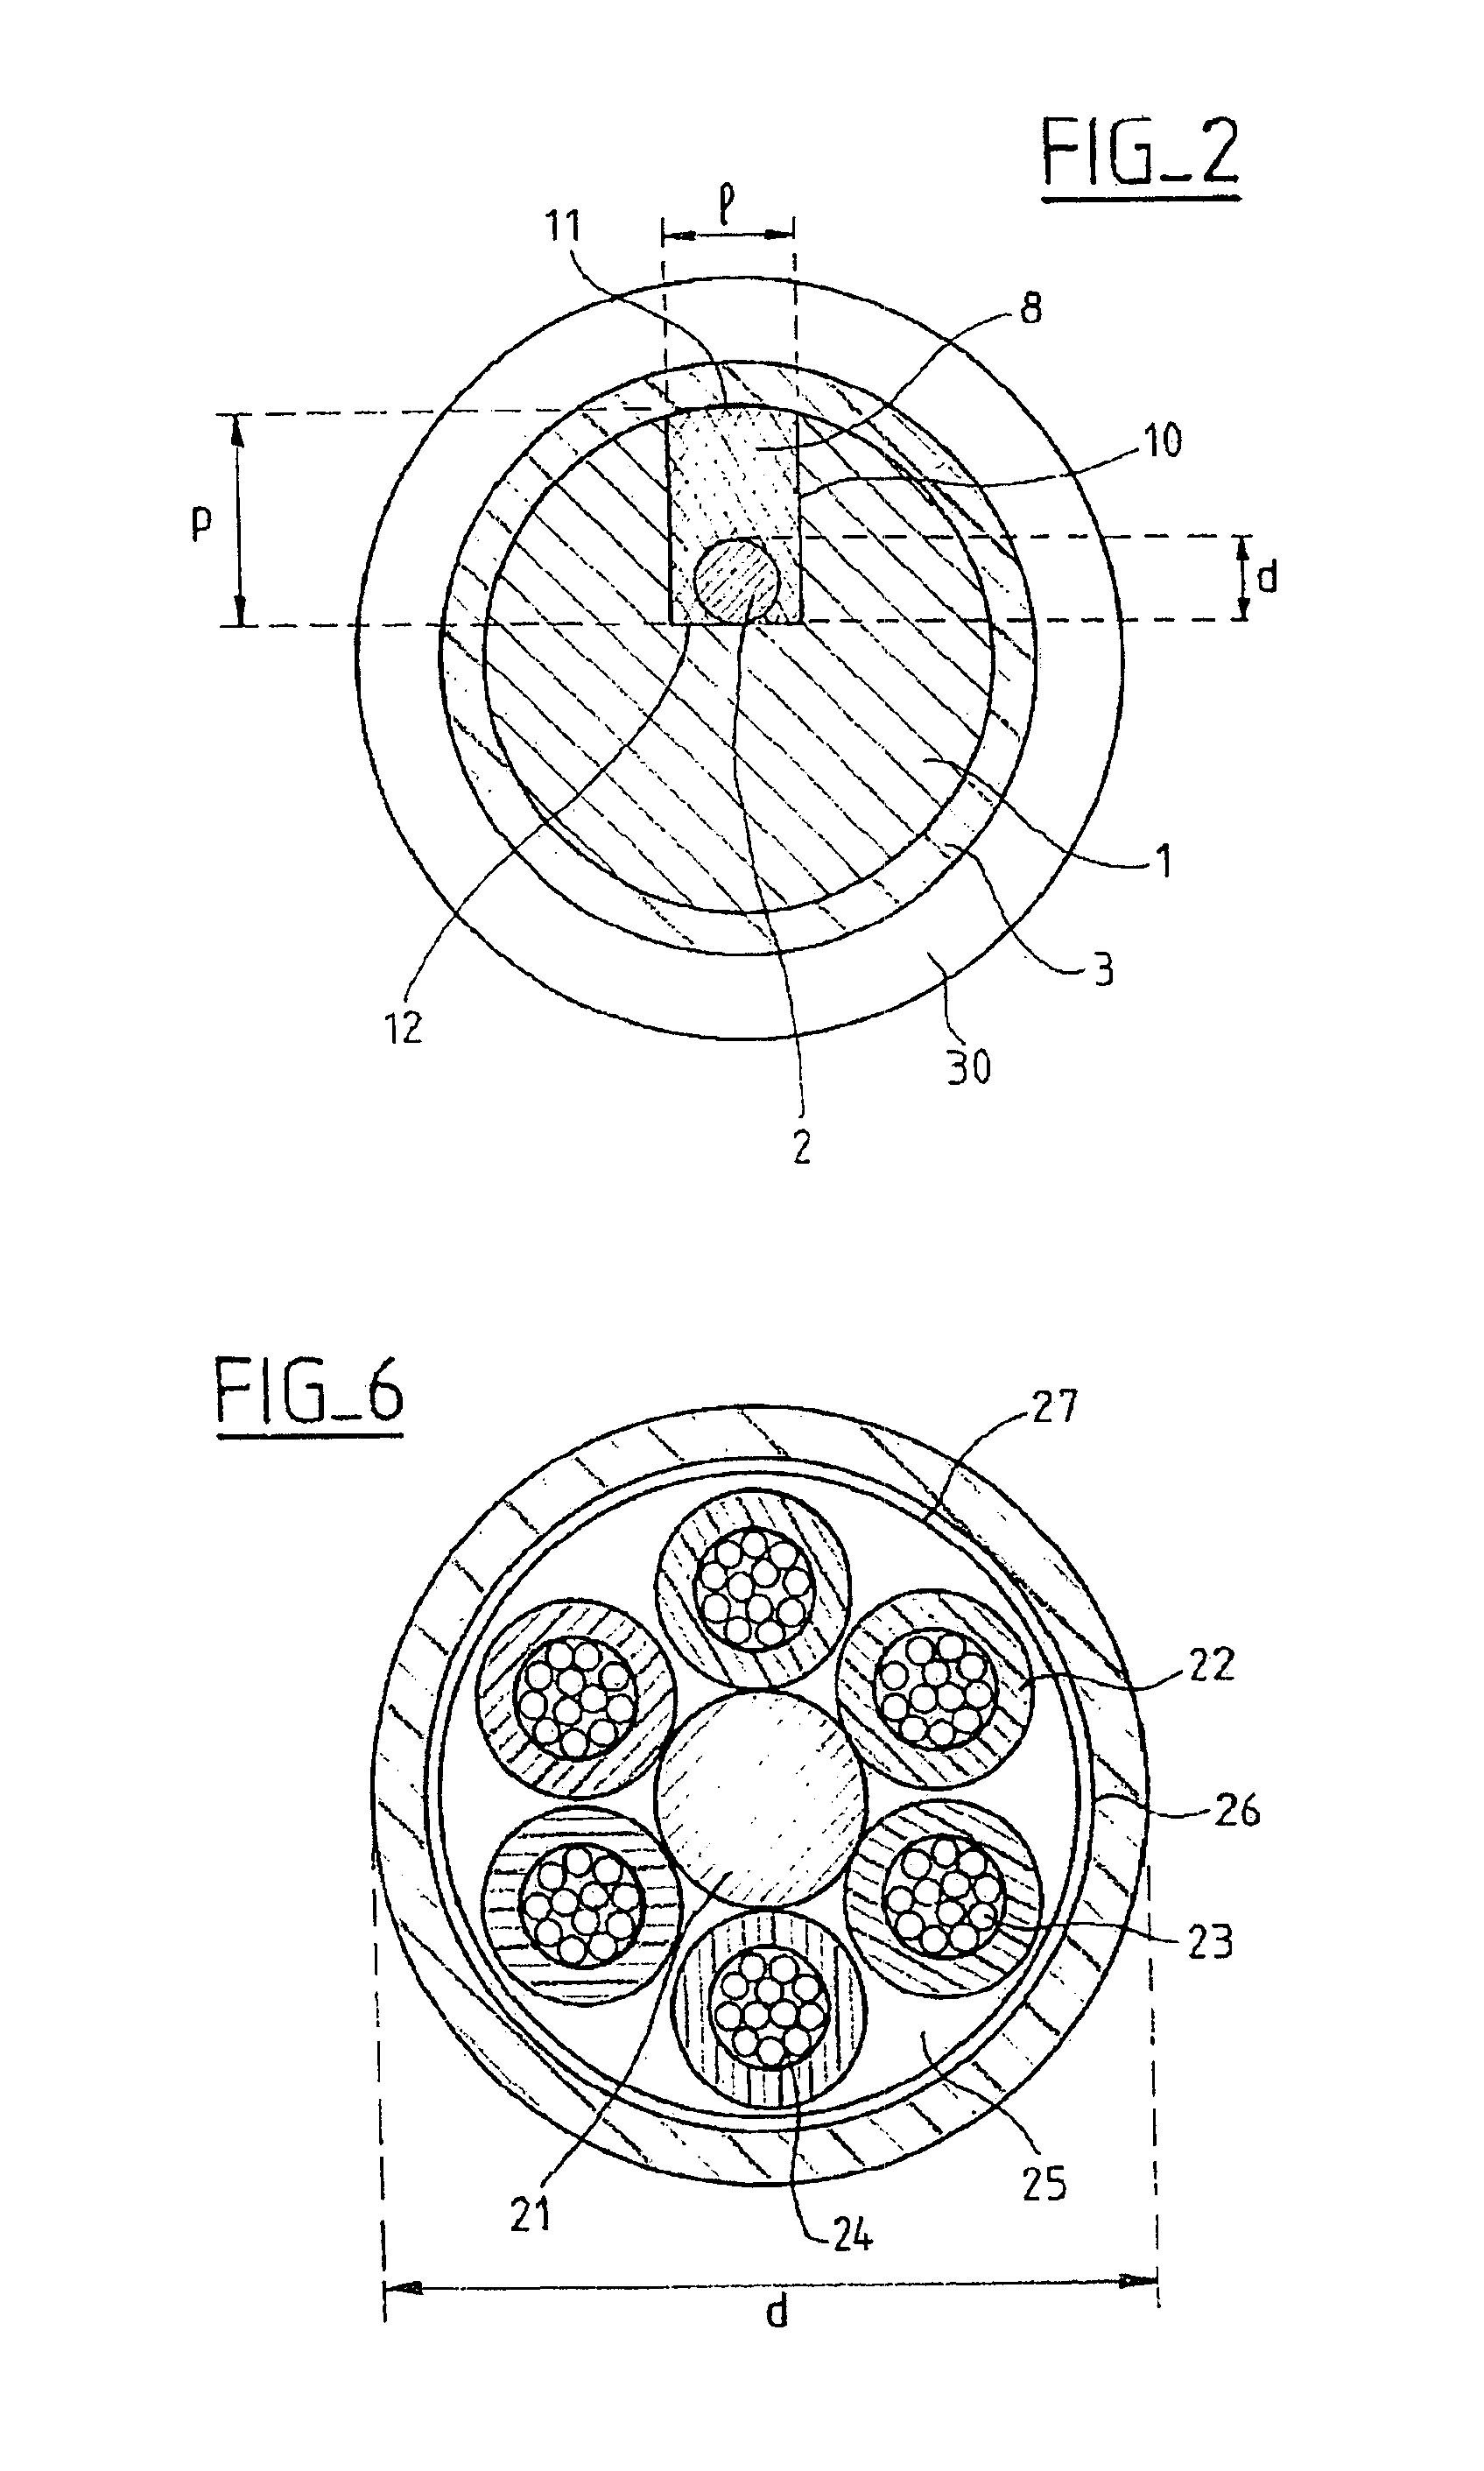 Electrical insulator having a dielectric rod with a slot for receiving an optical fiber cable